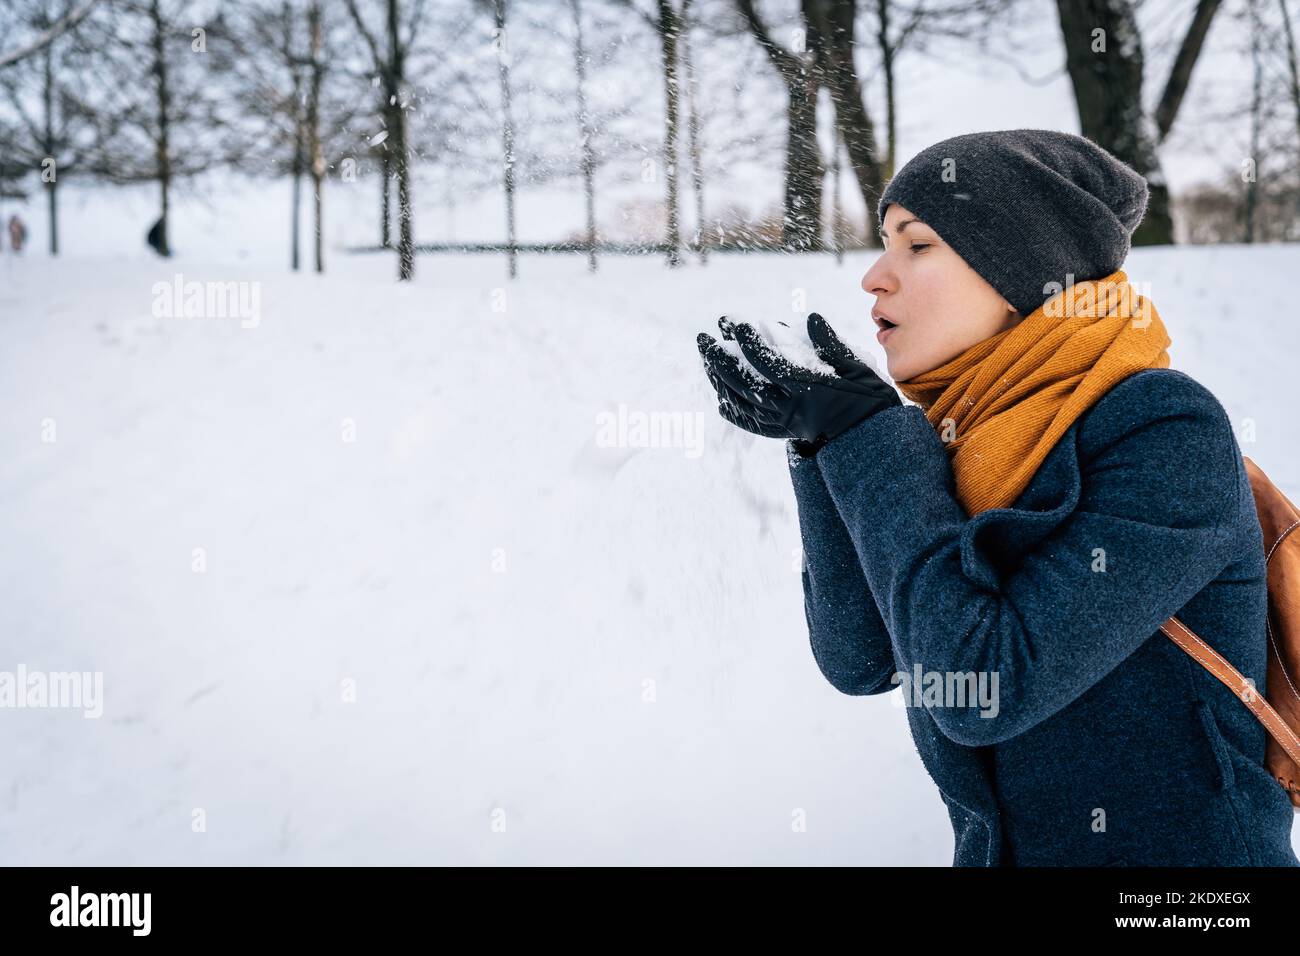 A woman in winter clothes blows snow off her palms in gloves. Stock Photo